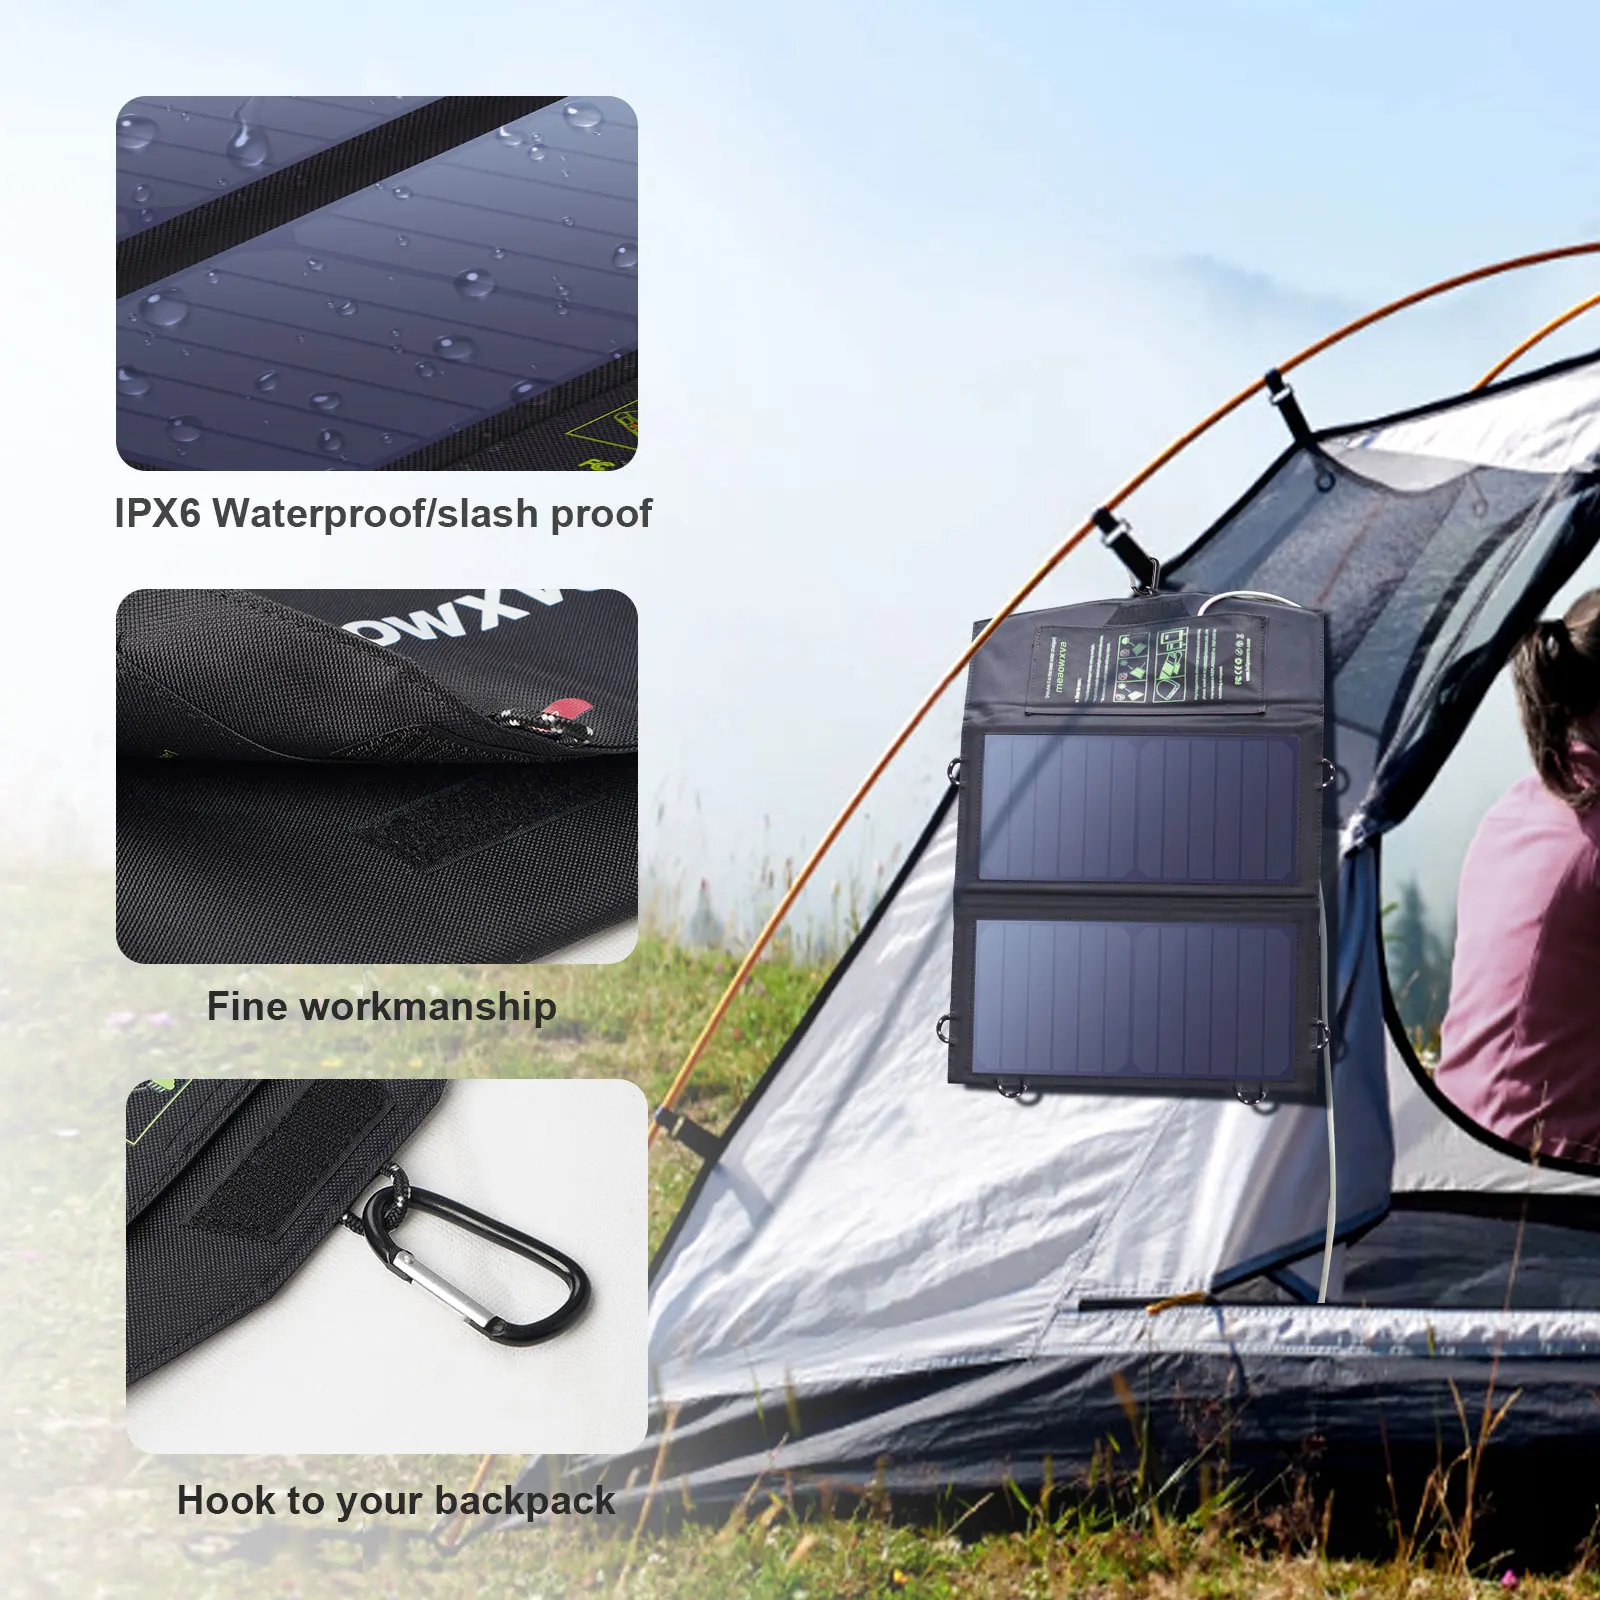 Portable Solar Panel Charger Panels